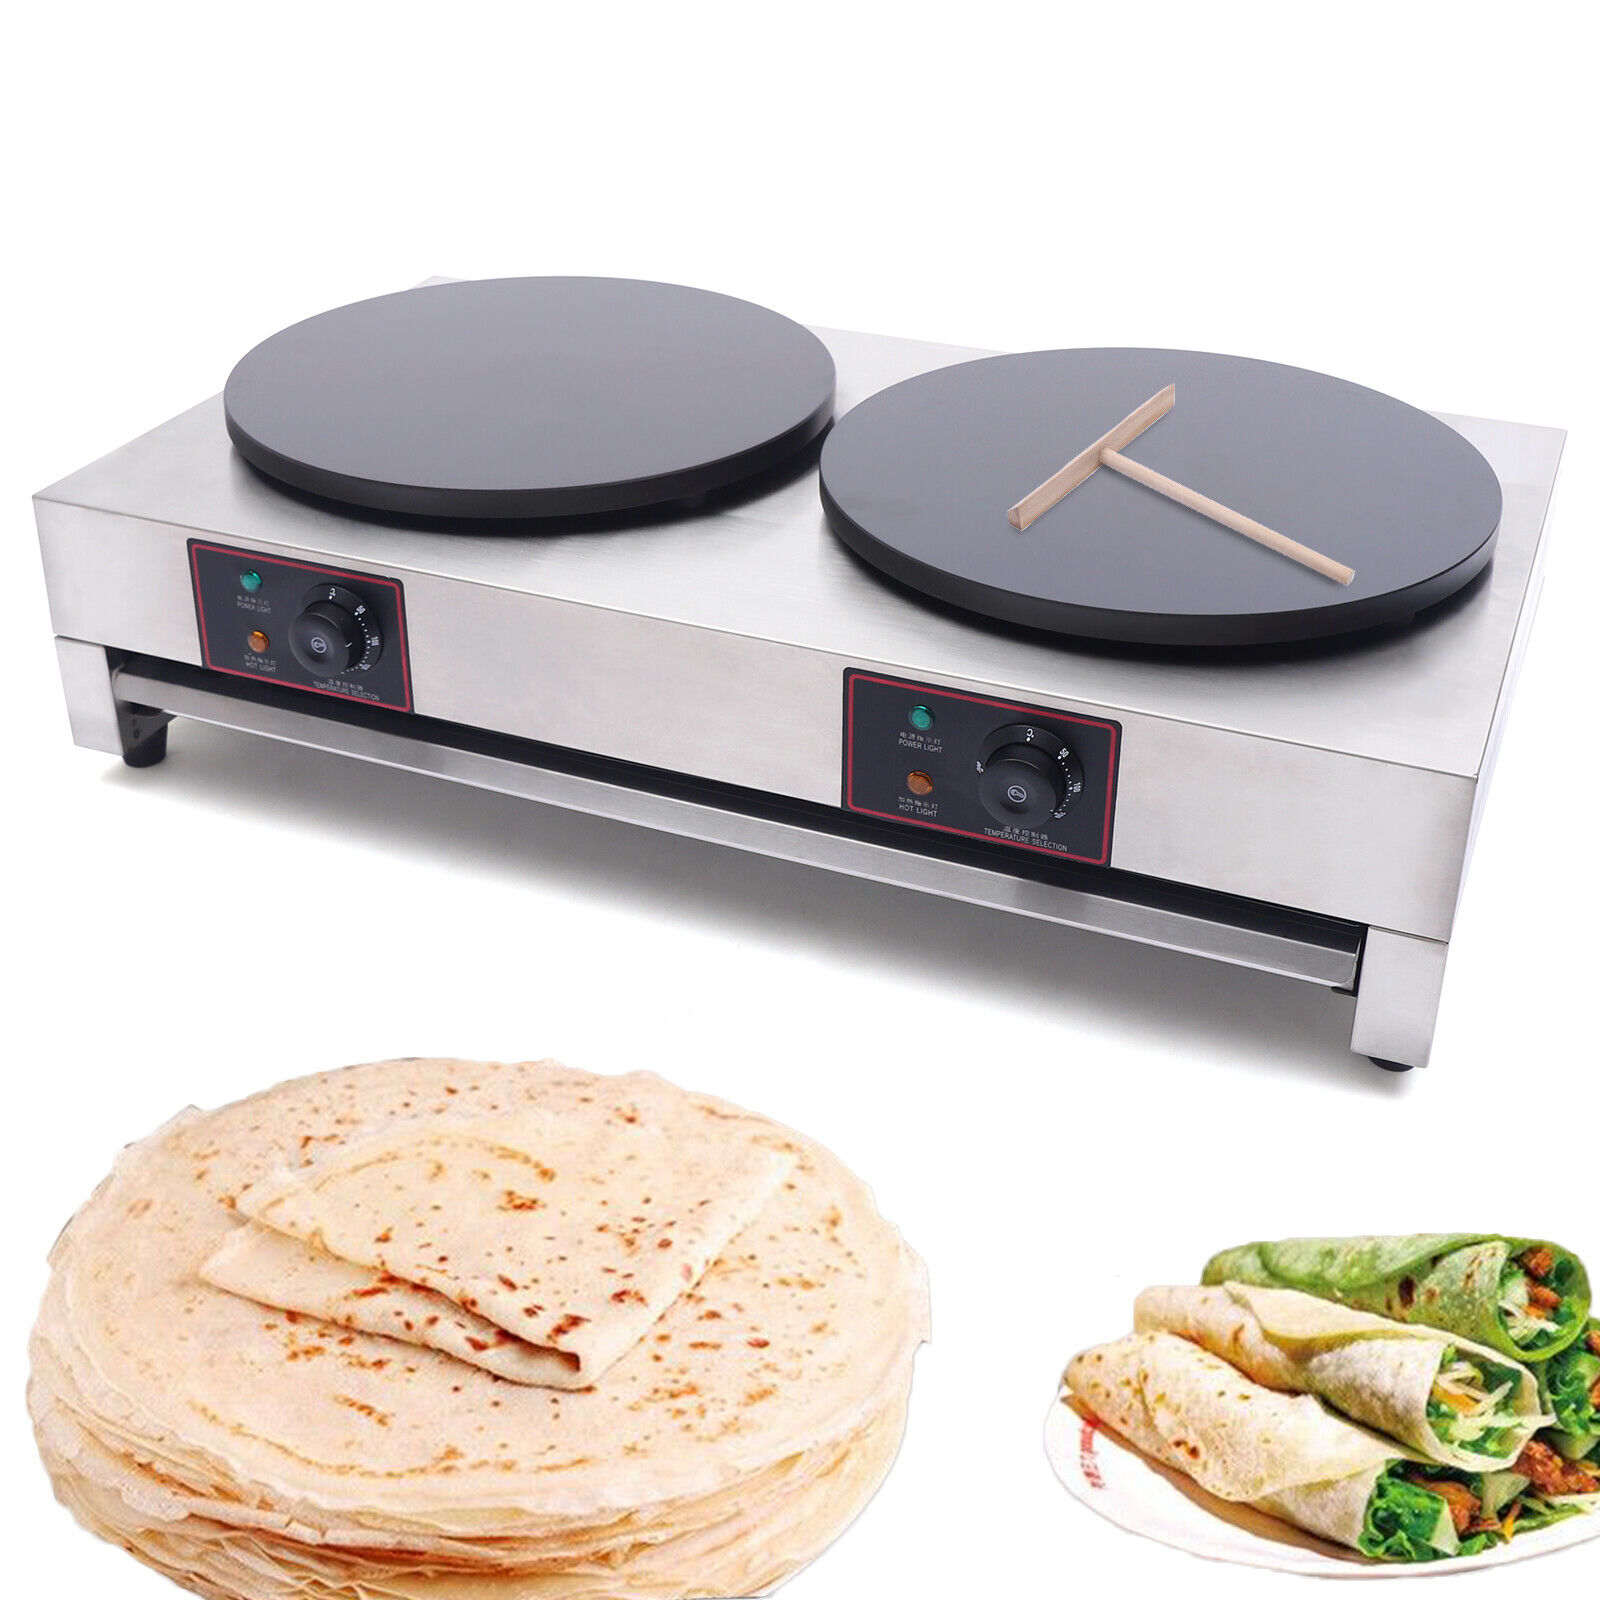 3kw+3kw 40cm 16" Commercial Double Pancake Maker Luxury Electric Crepe Unbranded Does Not Apply - фотография #15